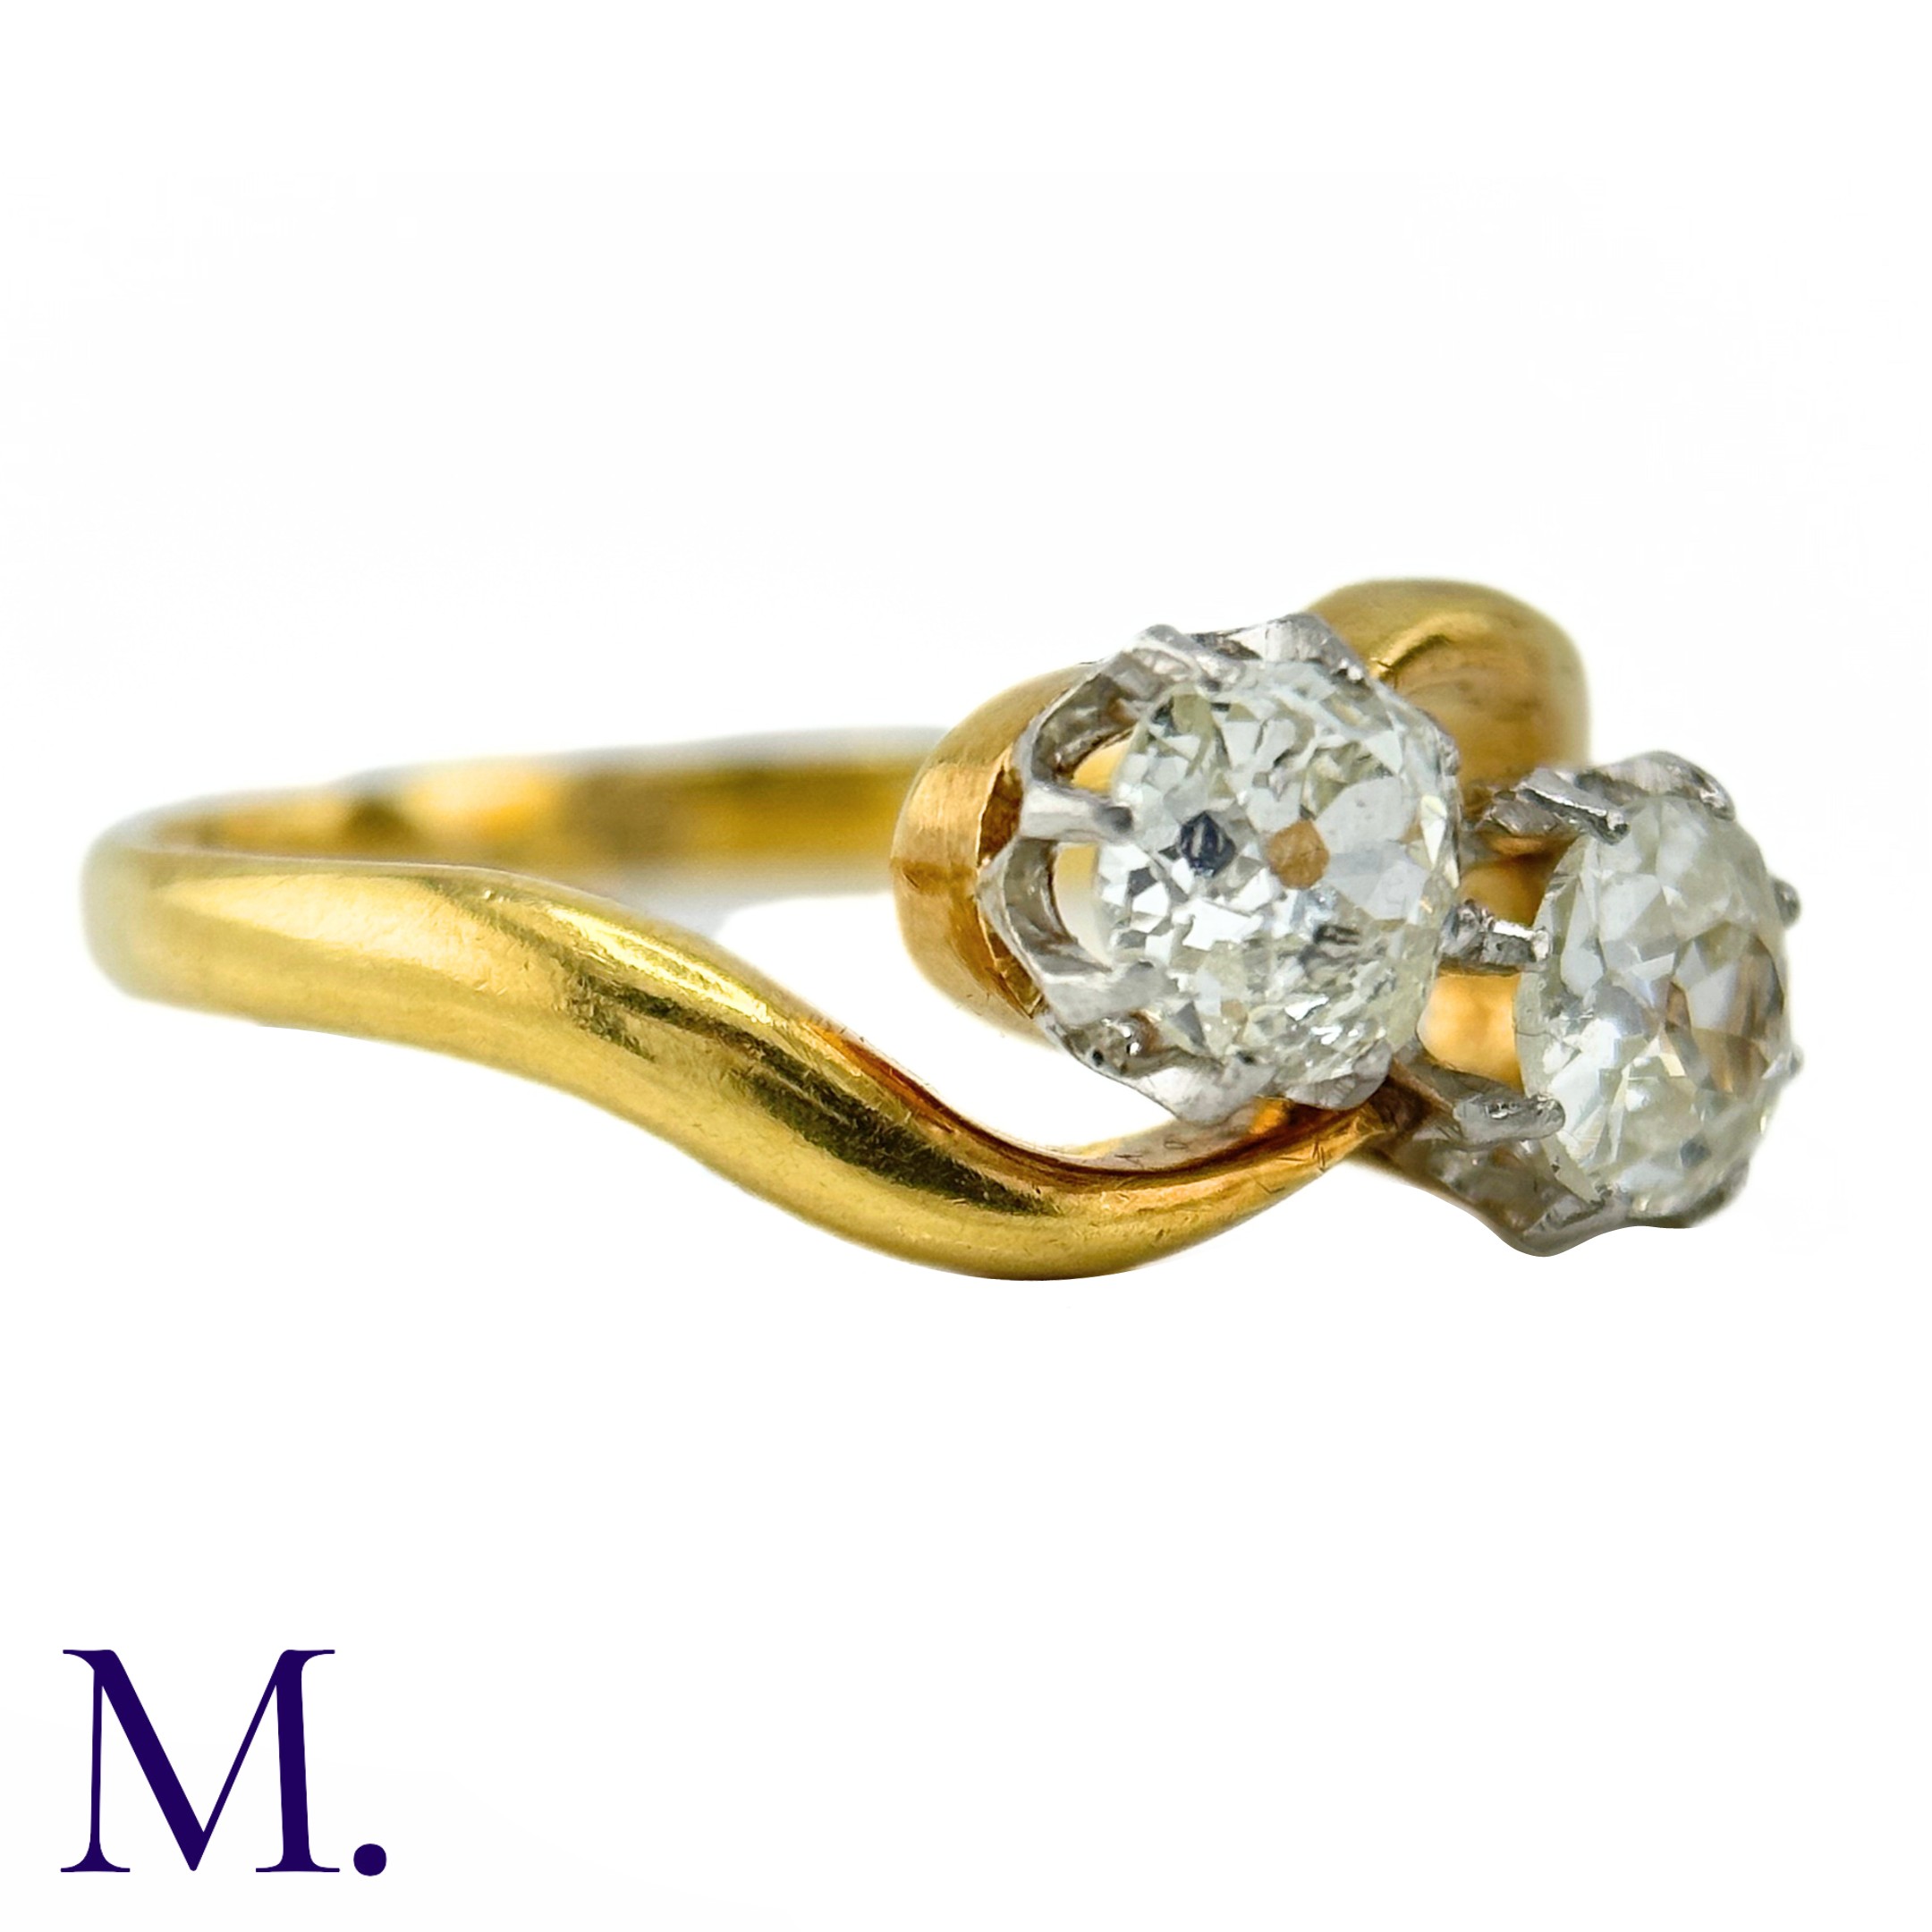 A Diamond Toi et Moi Ring Weight: 3.2g Size: L 0.45 + 0.5ct - Image 6 of 6